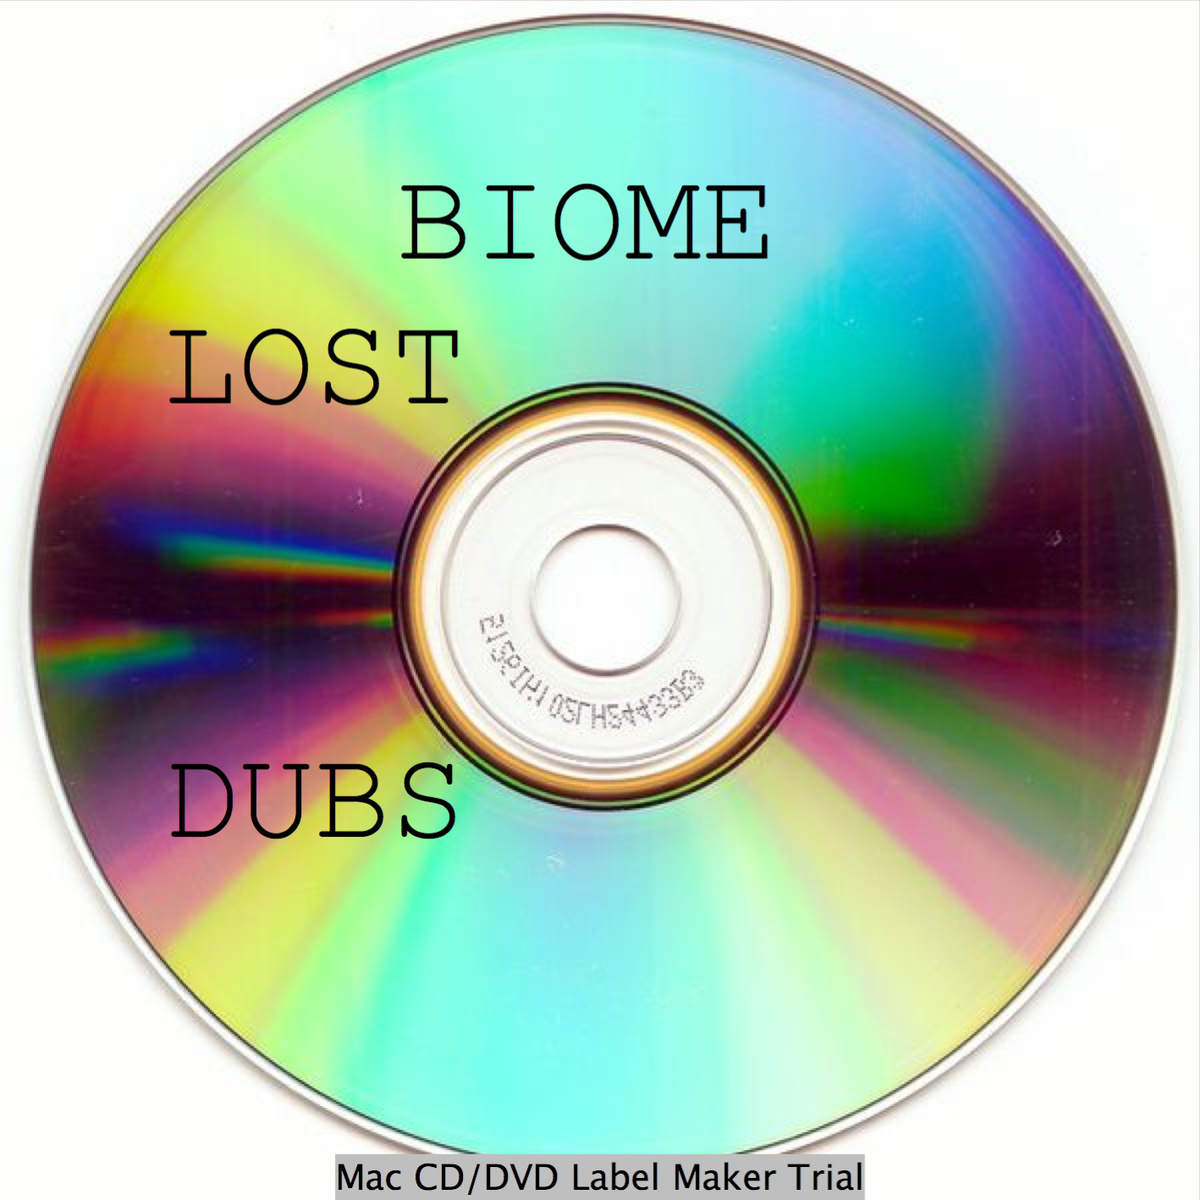 Biome – Lost Dubs v3